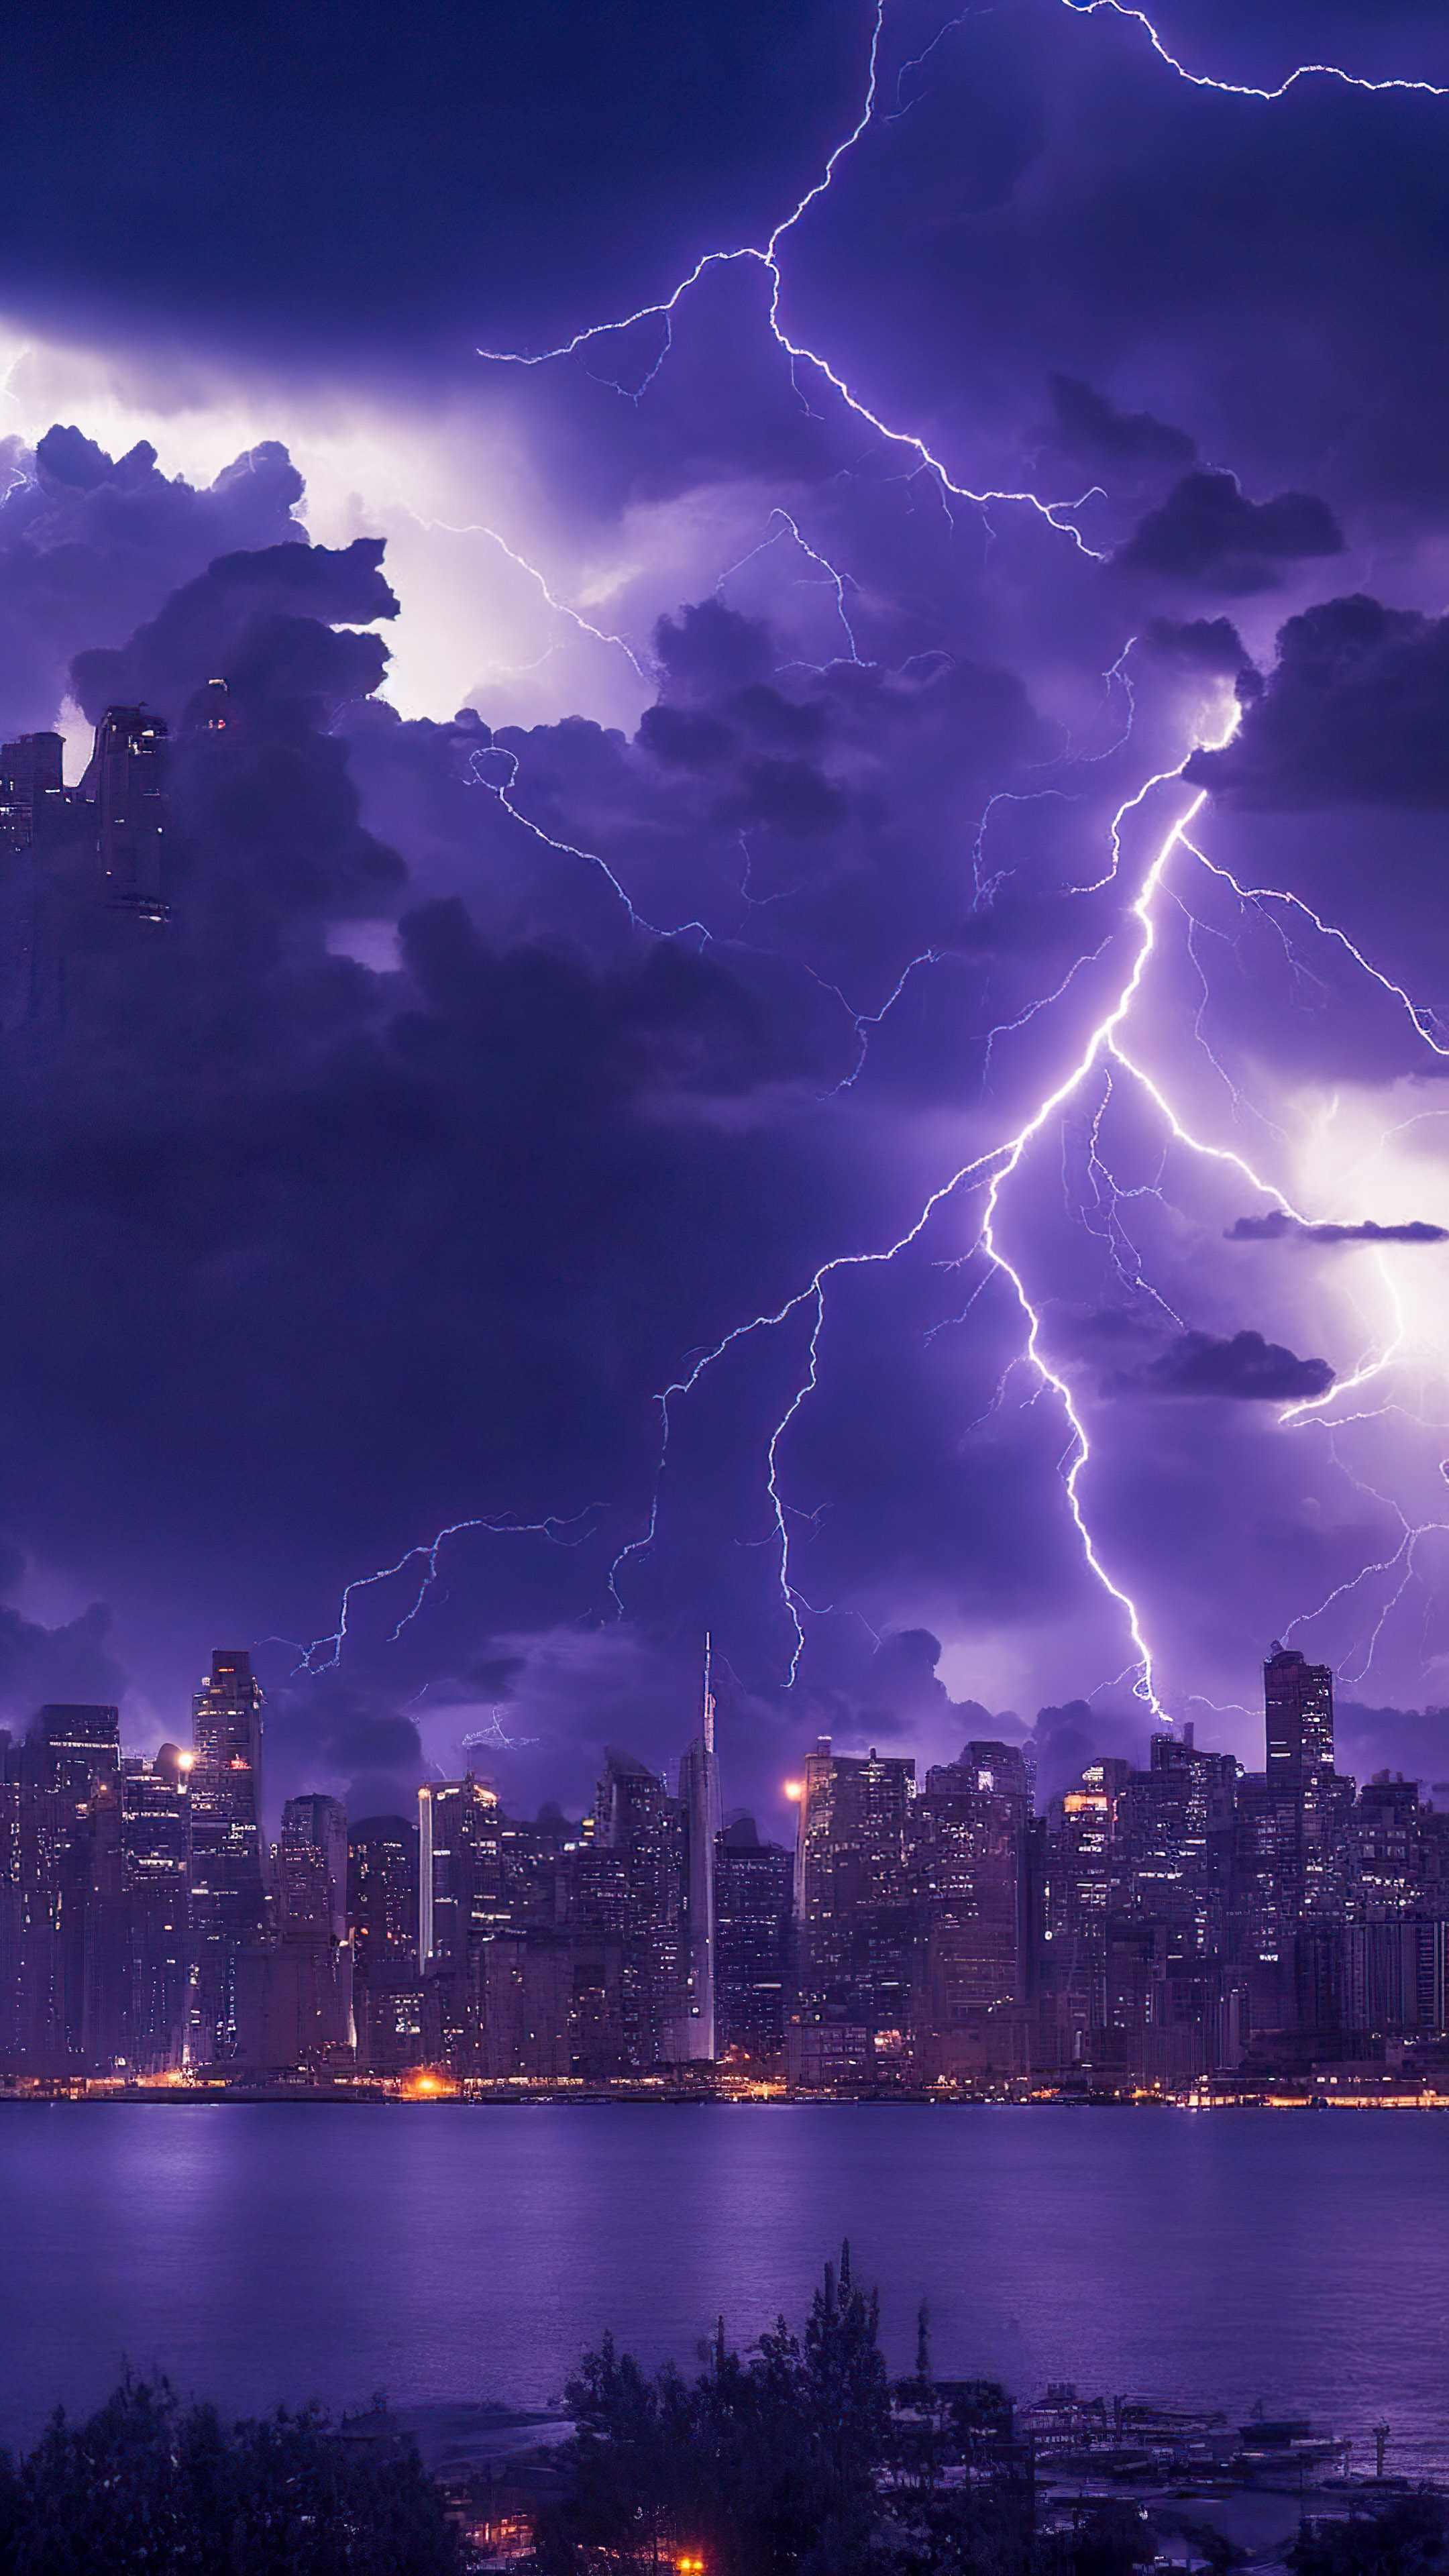 Witness the drama of an epic thunderstorm brewing over a city skyline, with lightning bolts illuminating the dark clouds, through our night sky wallpaper.